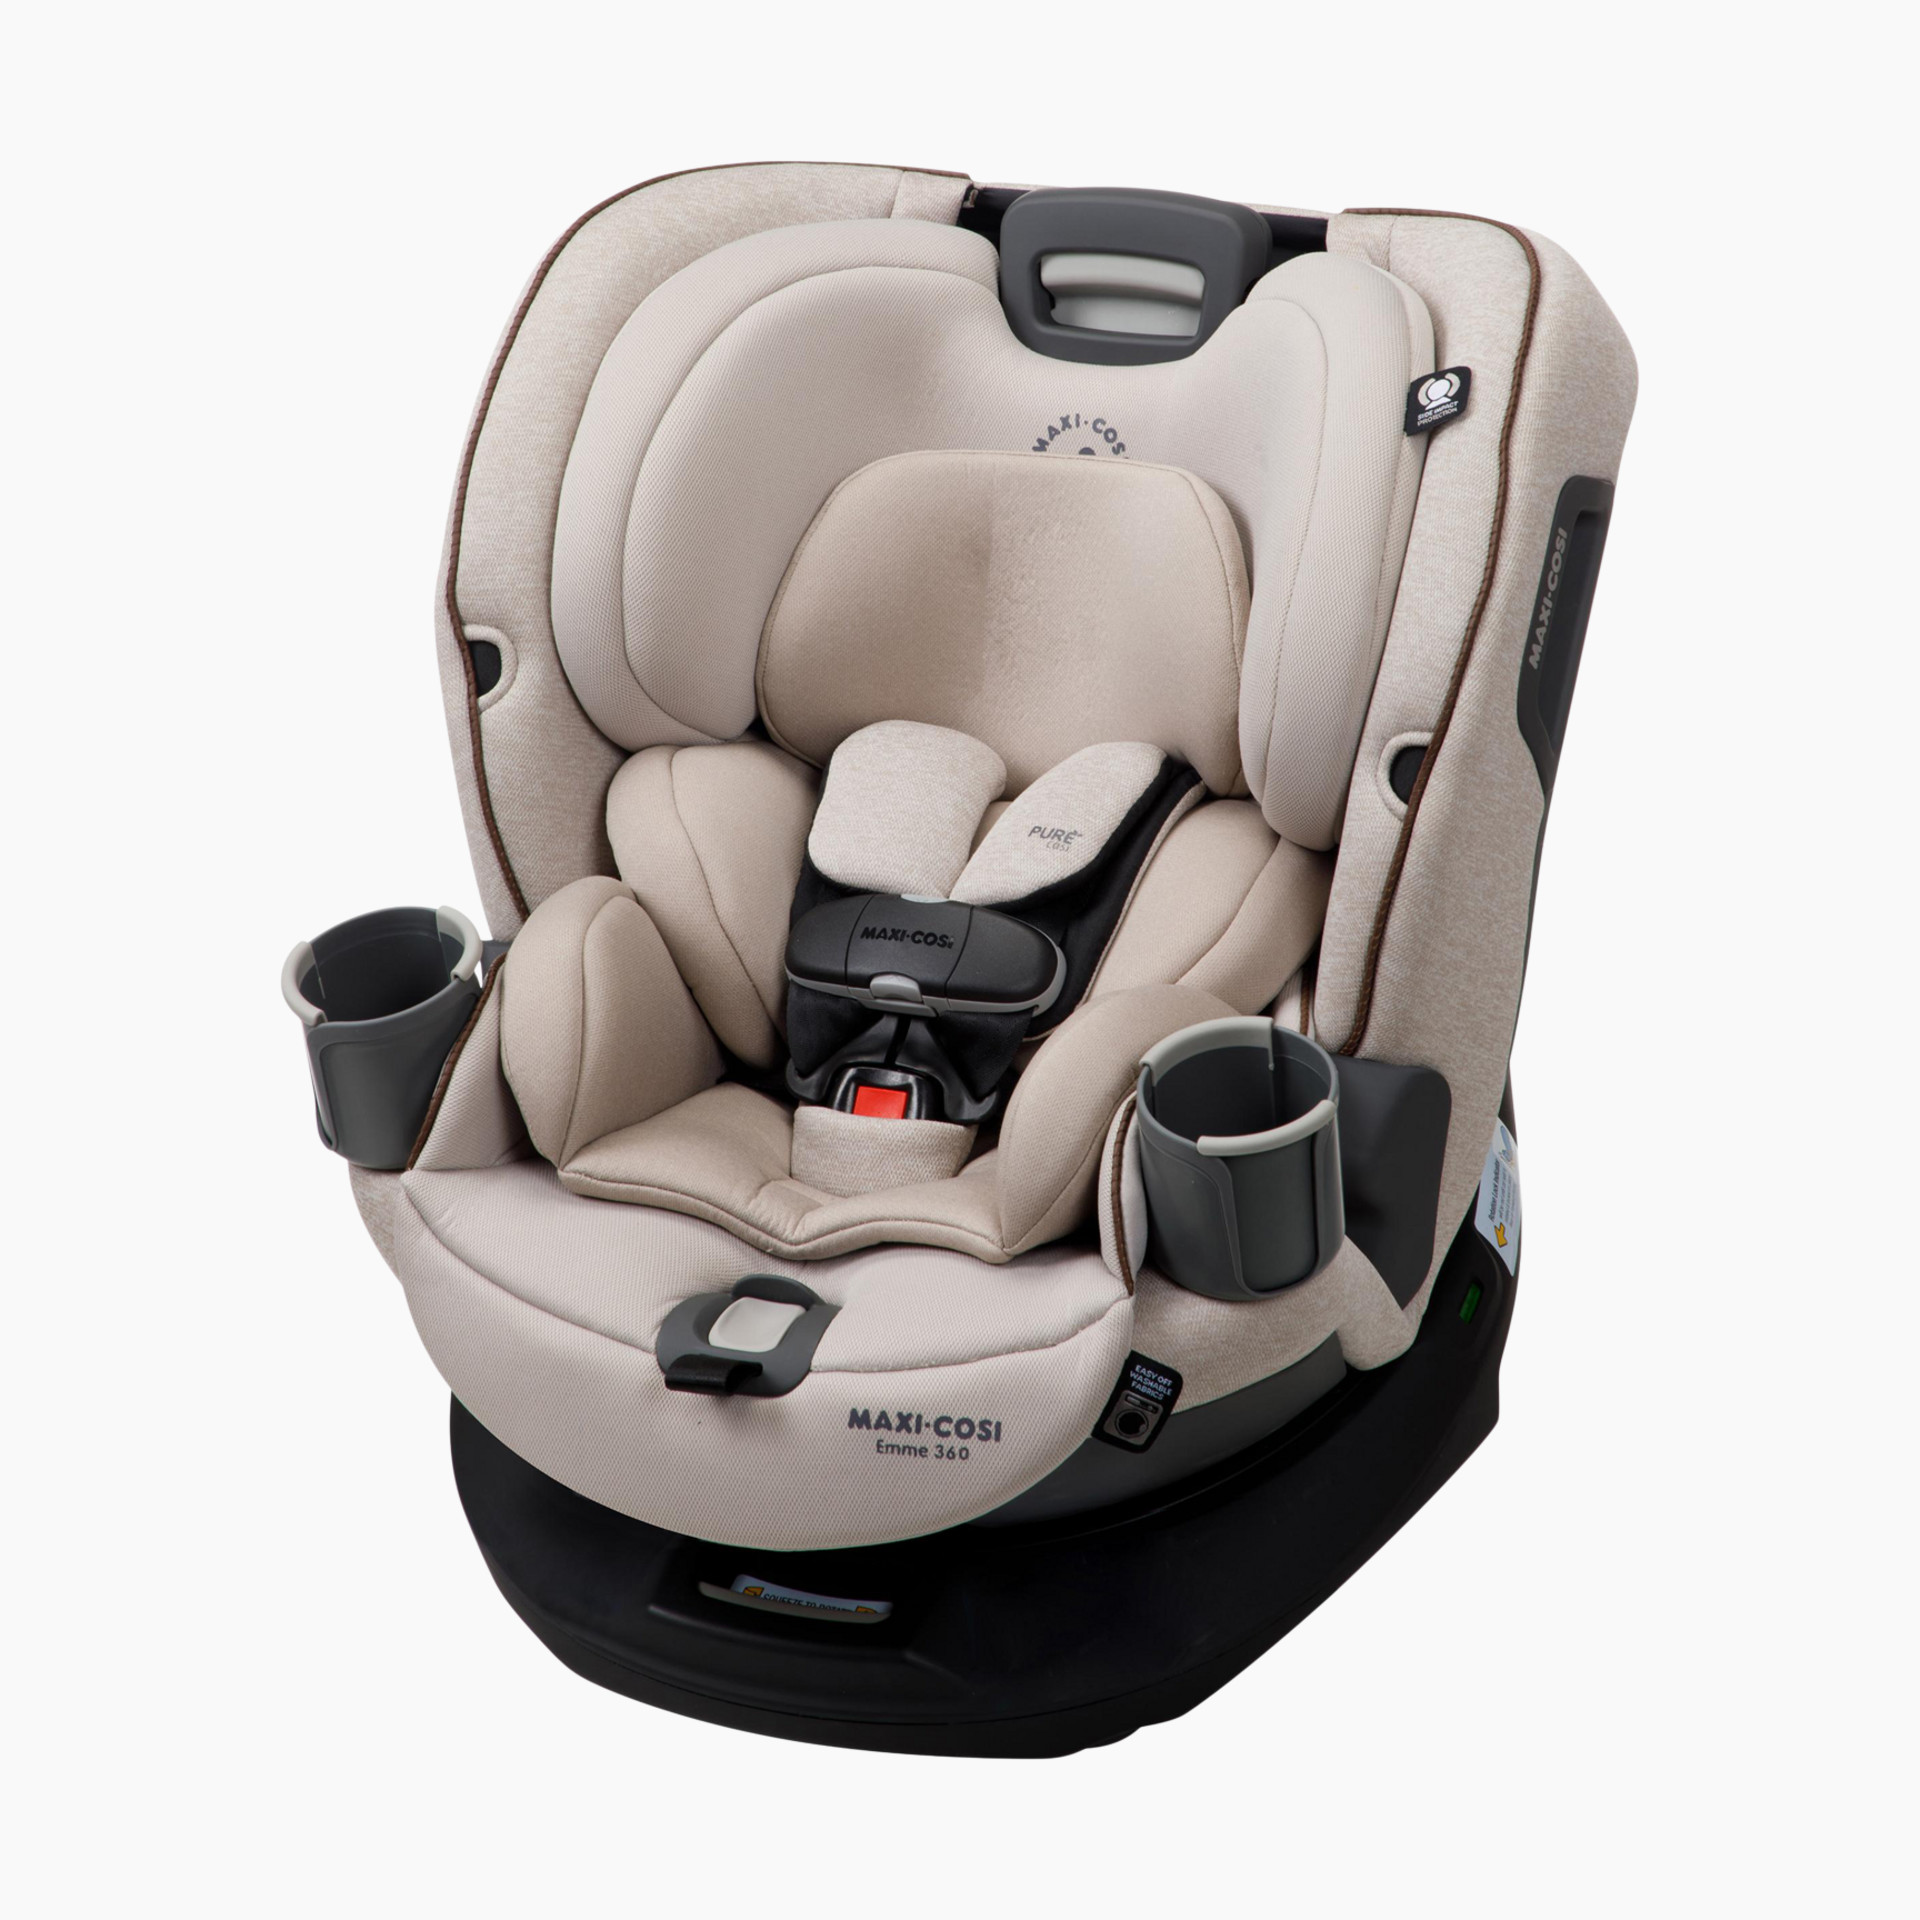 Maxi Cosi Nomad - A Surprisingly Disappointing Car Seat 